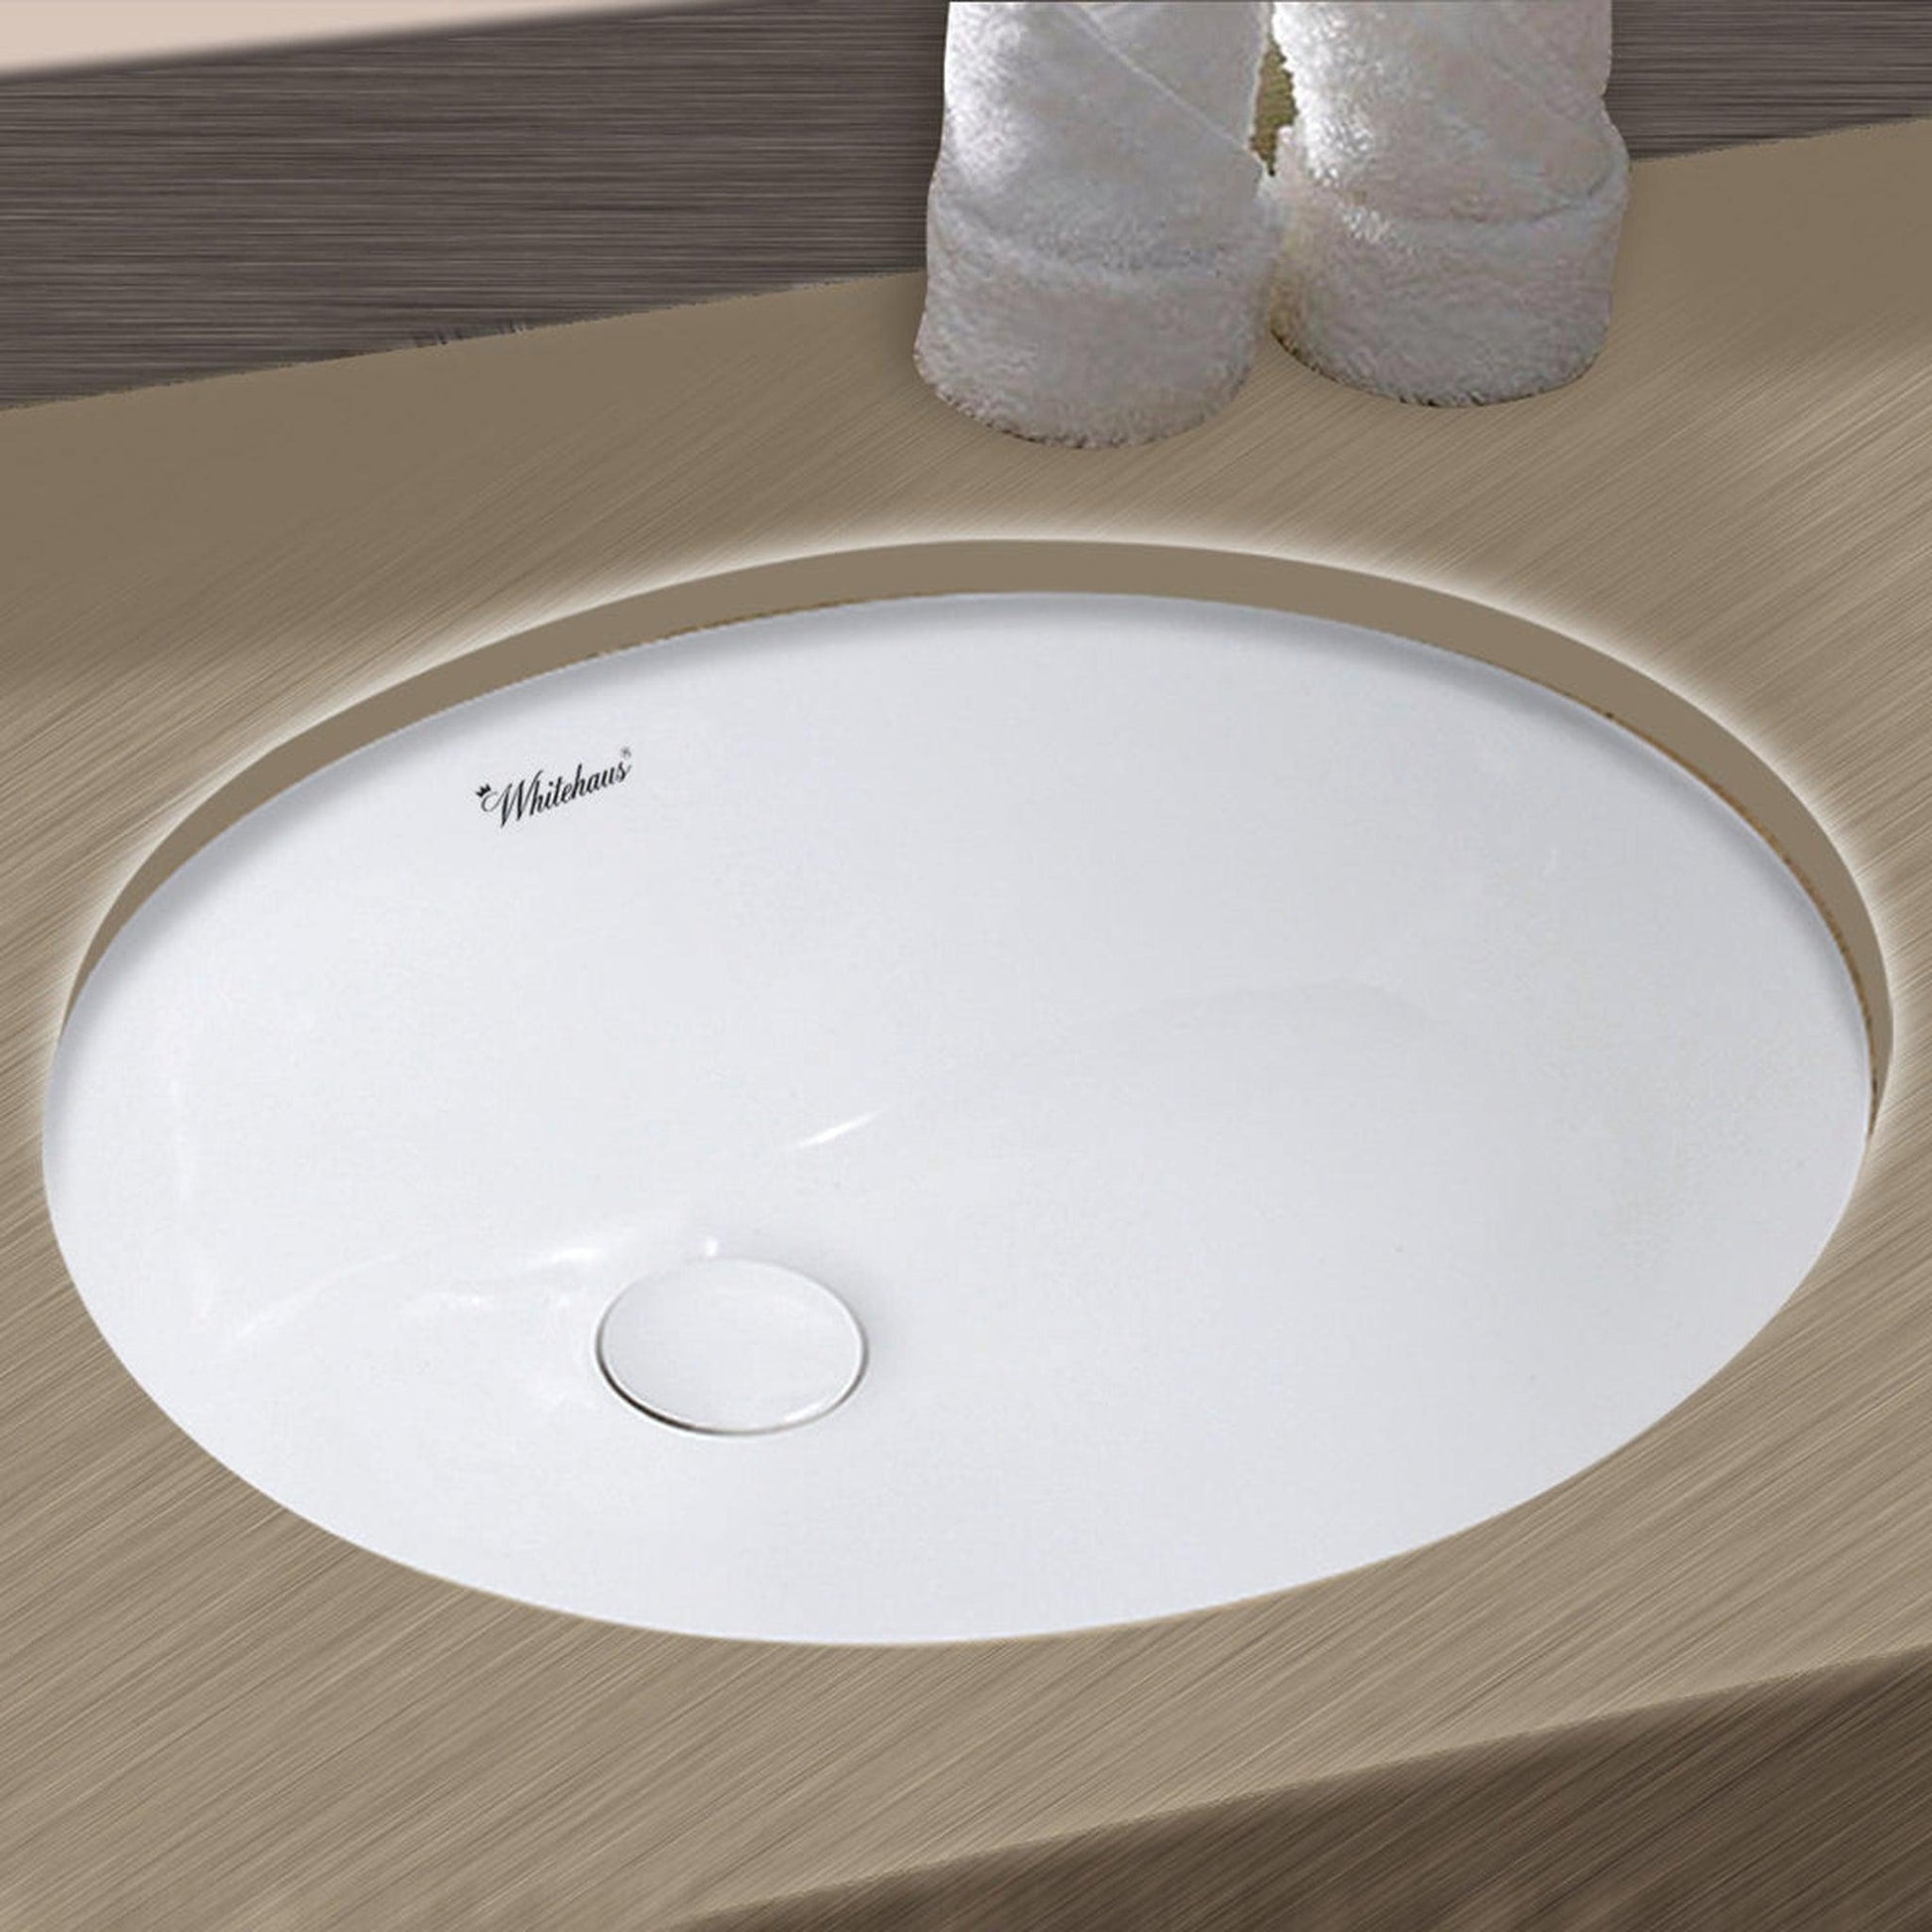 Whitehaus Isabella Plus WHU71003 White Oval Undermount Basin With Overflow and Rear Center Drain